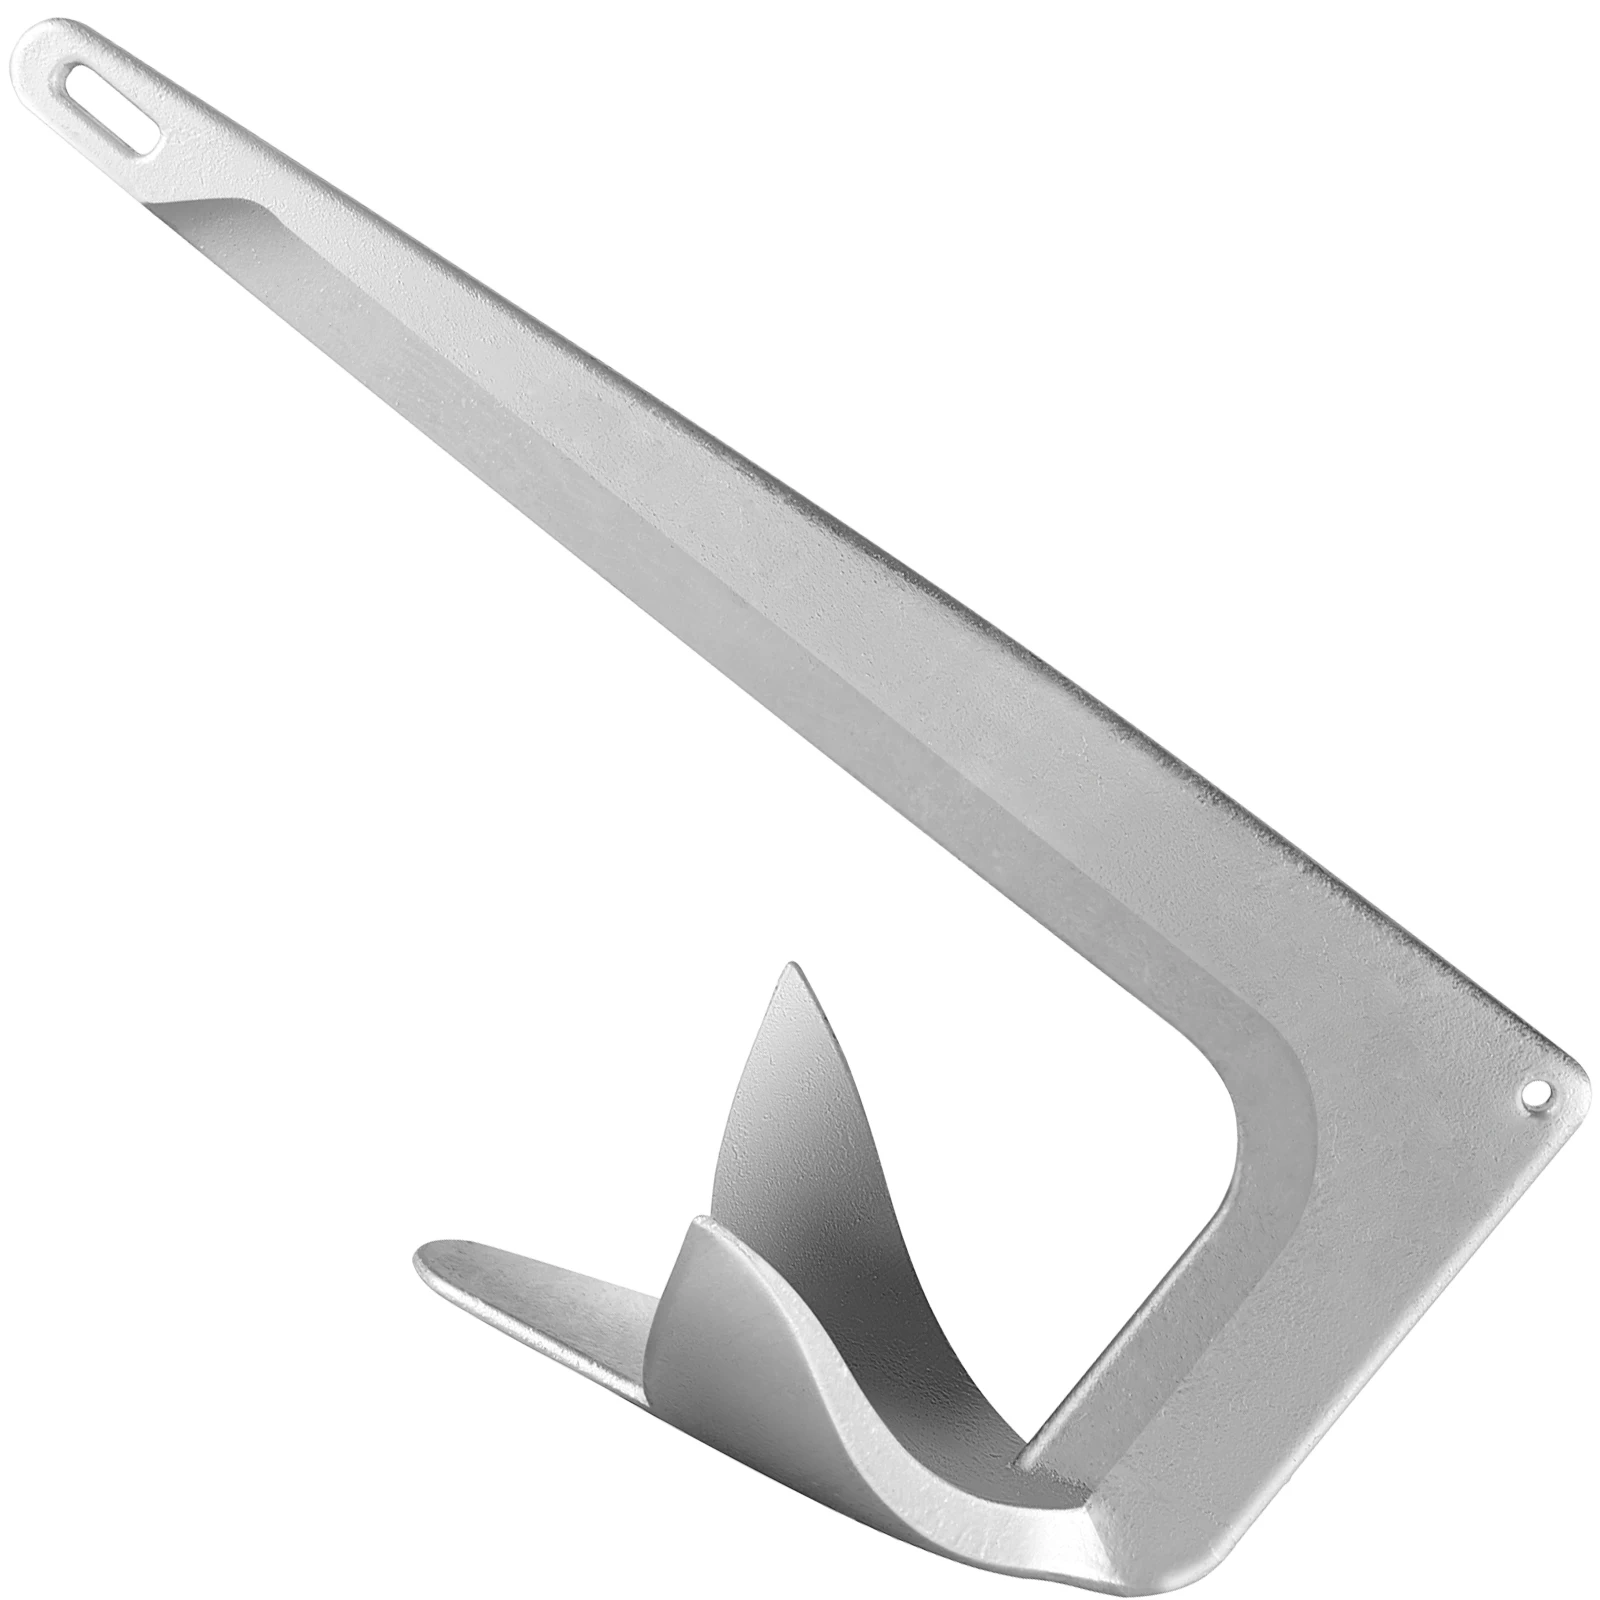 

VEVOR 11 LBS / 5 KG Bruce-Style Claw Anchor Suitable for 16 - 23 FT Ships Galvanized Steel Boat Delta Anchor With Strong Grip